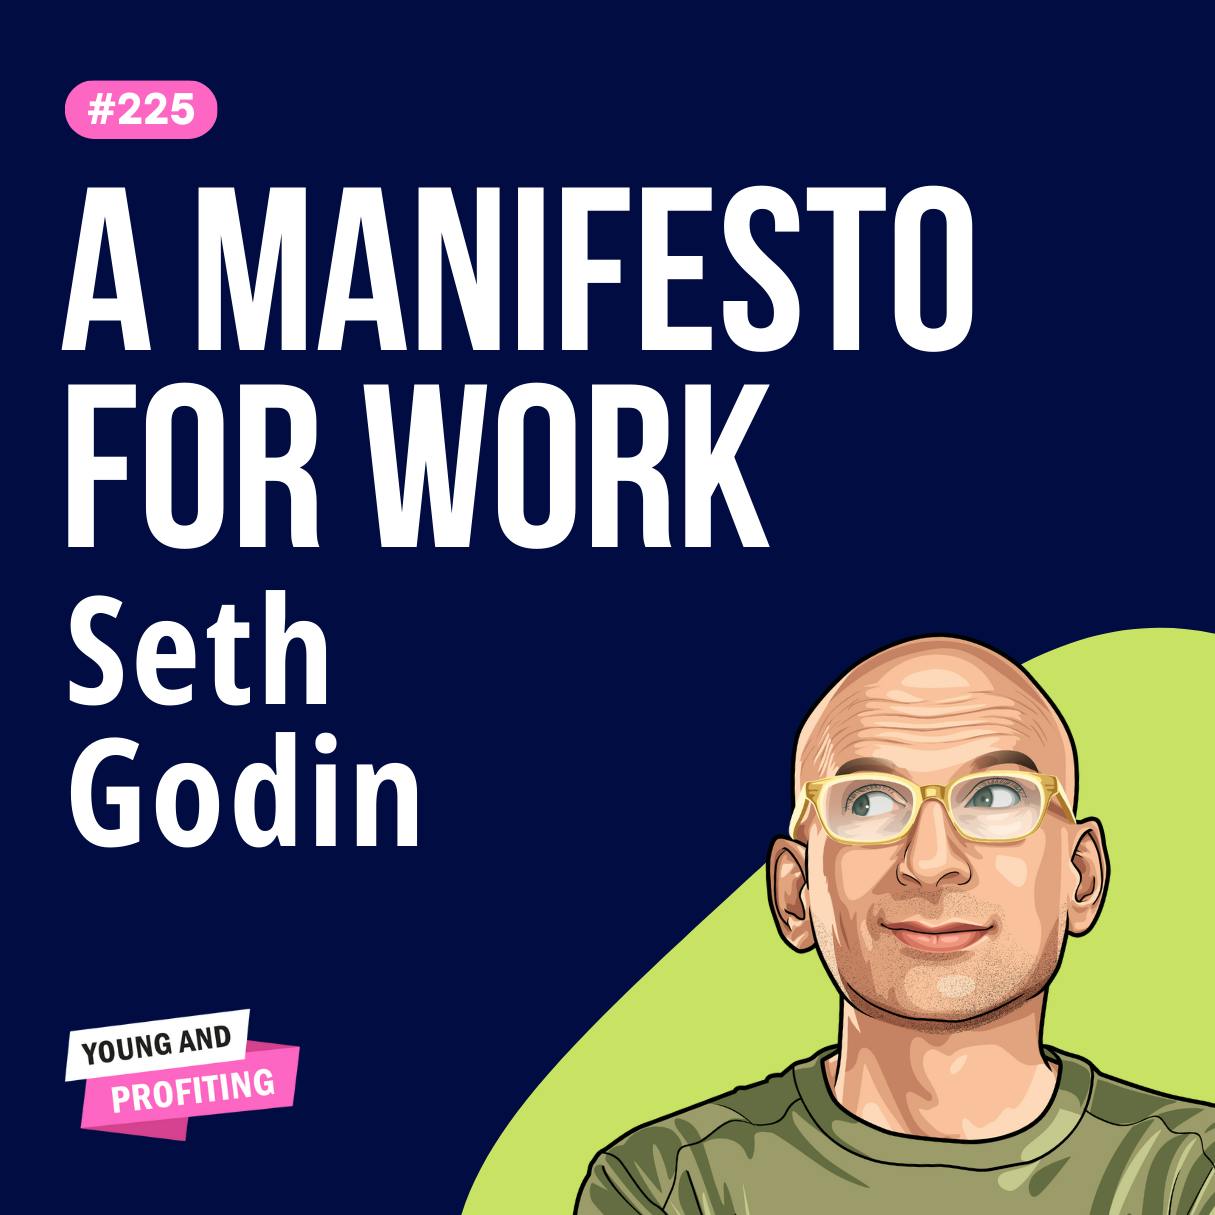 Seth Godin: Why Employee Productivity Is at a 70-Year Low and What to Do About It | E225 by Hala Taha | YAP Media Network